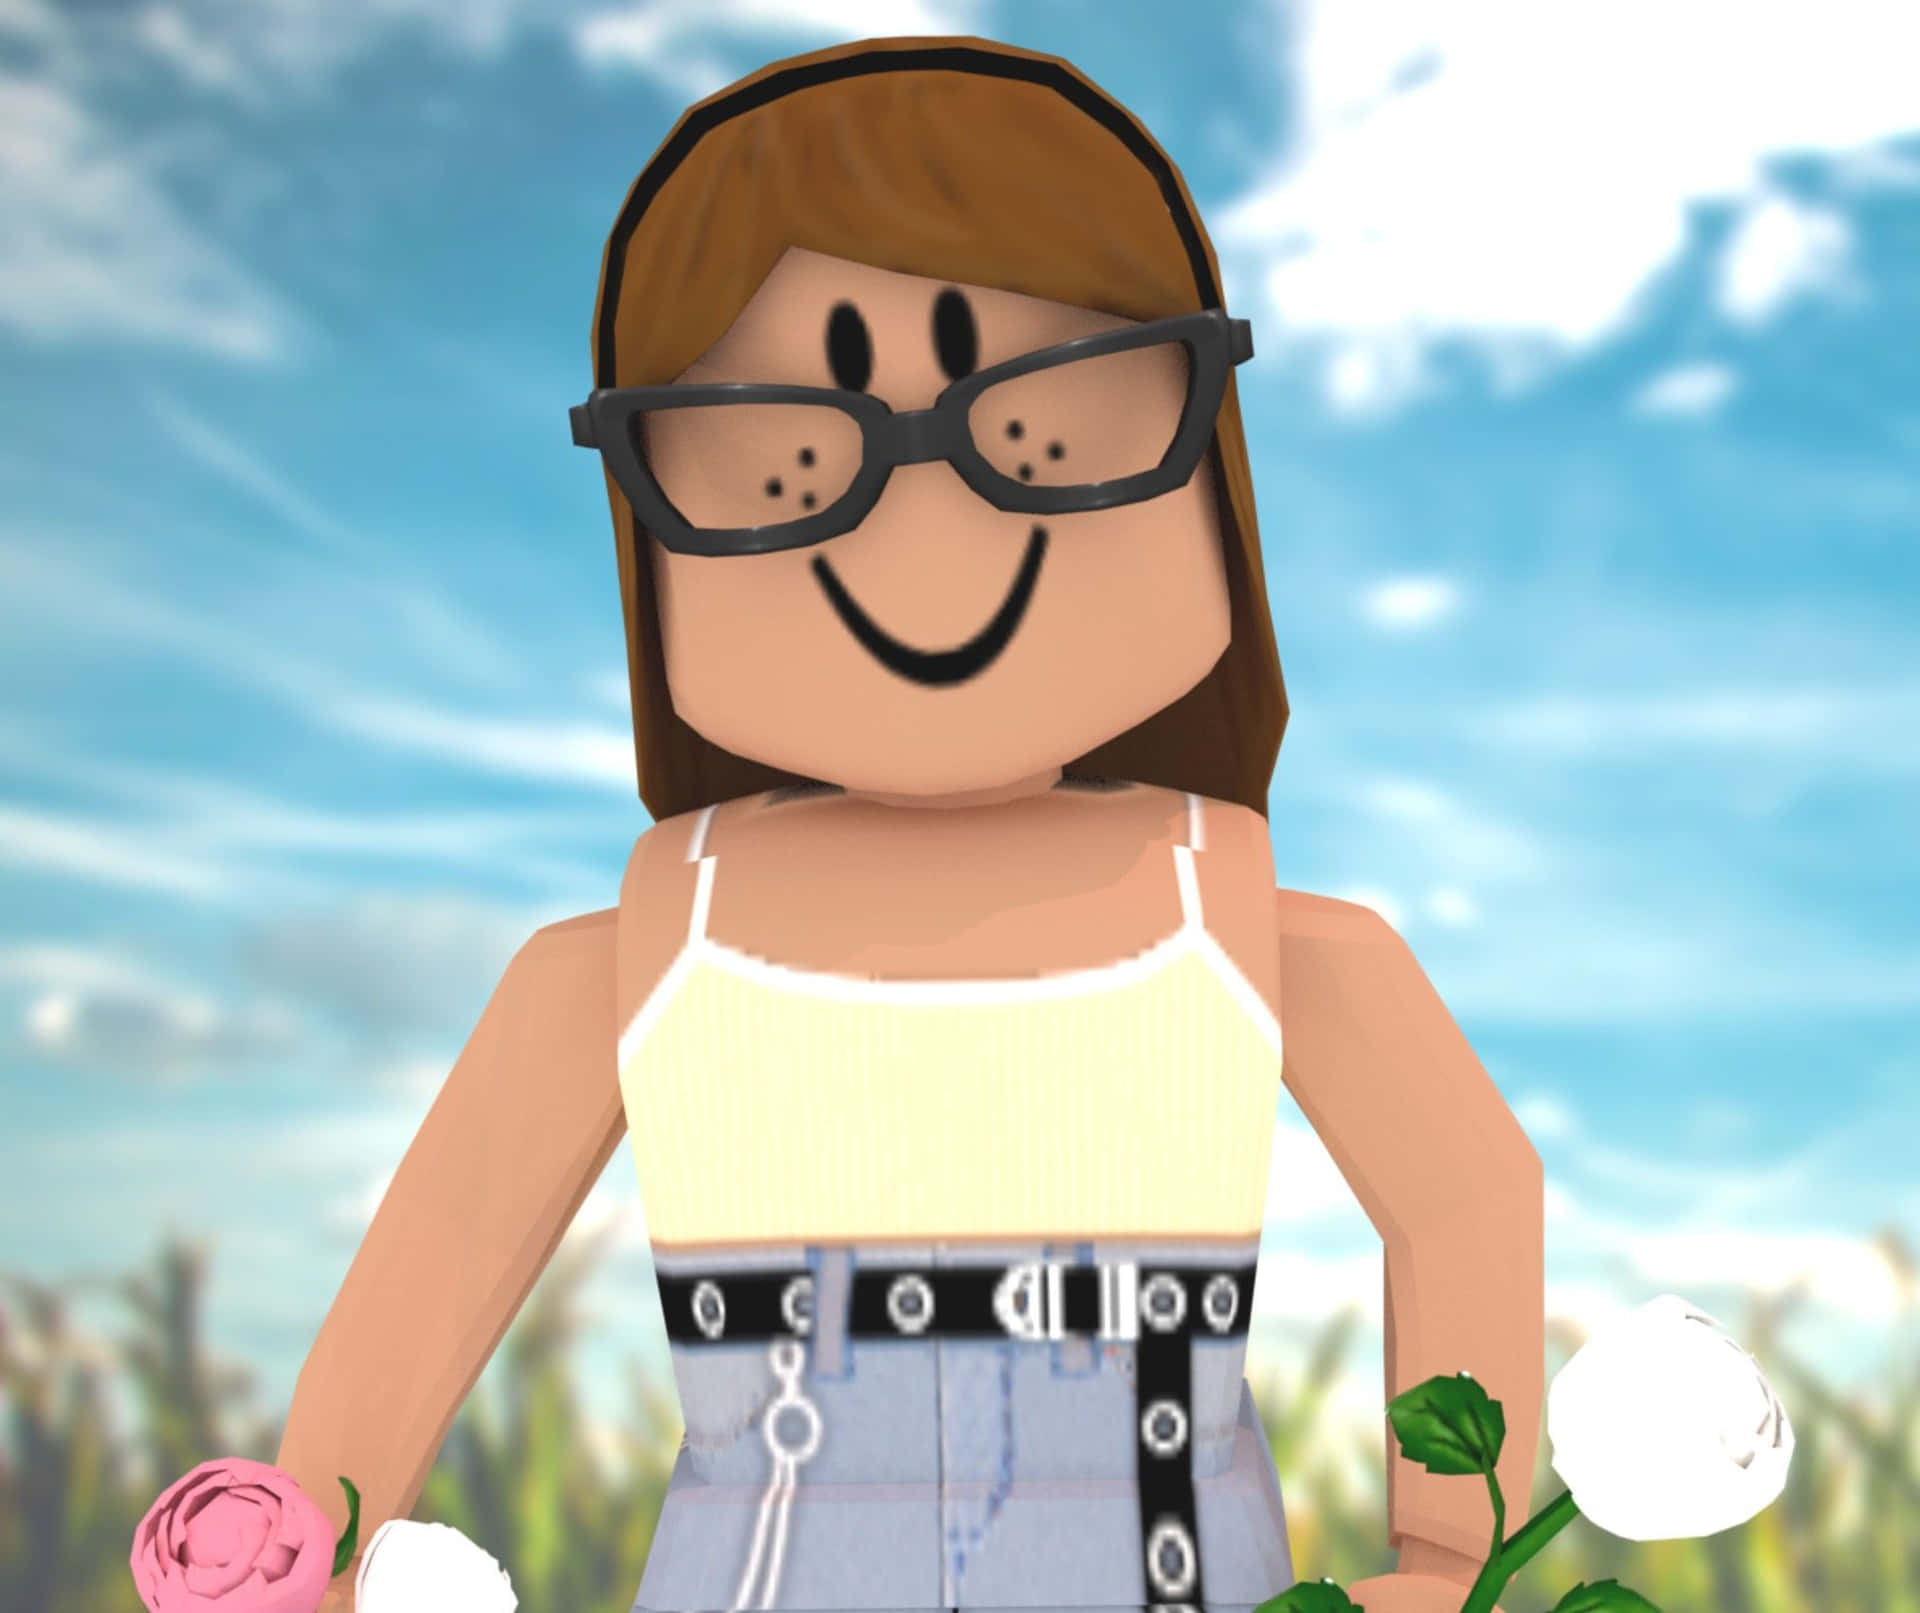 Get the cutest look with Roblox!